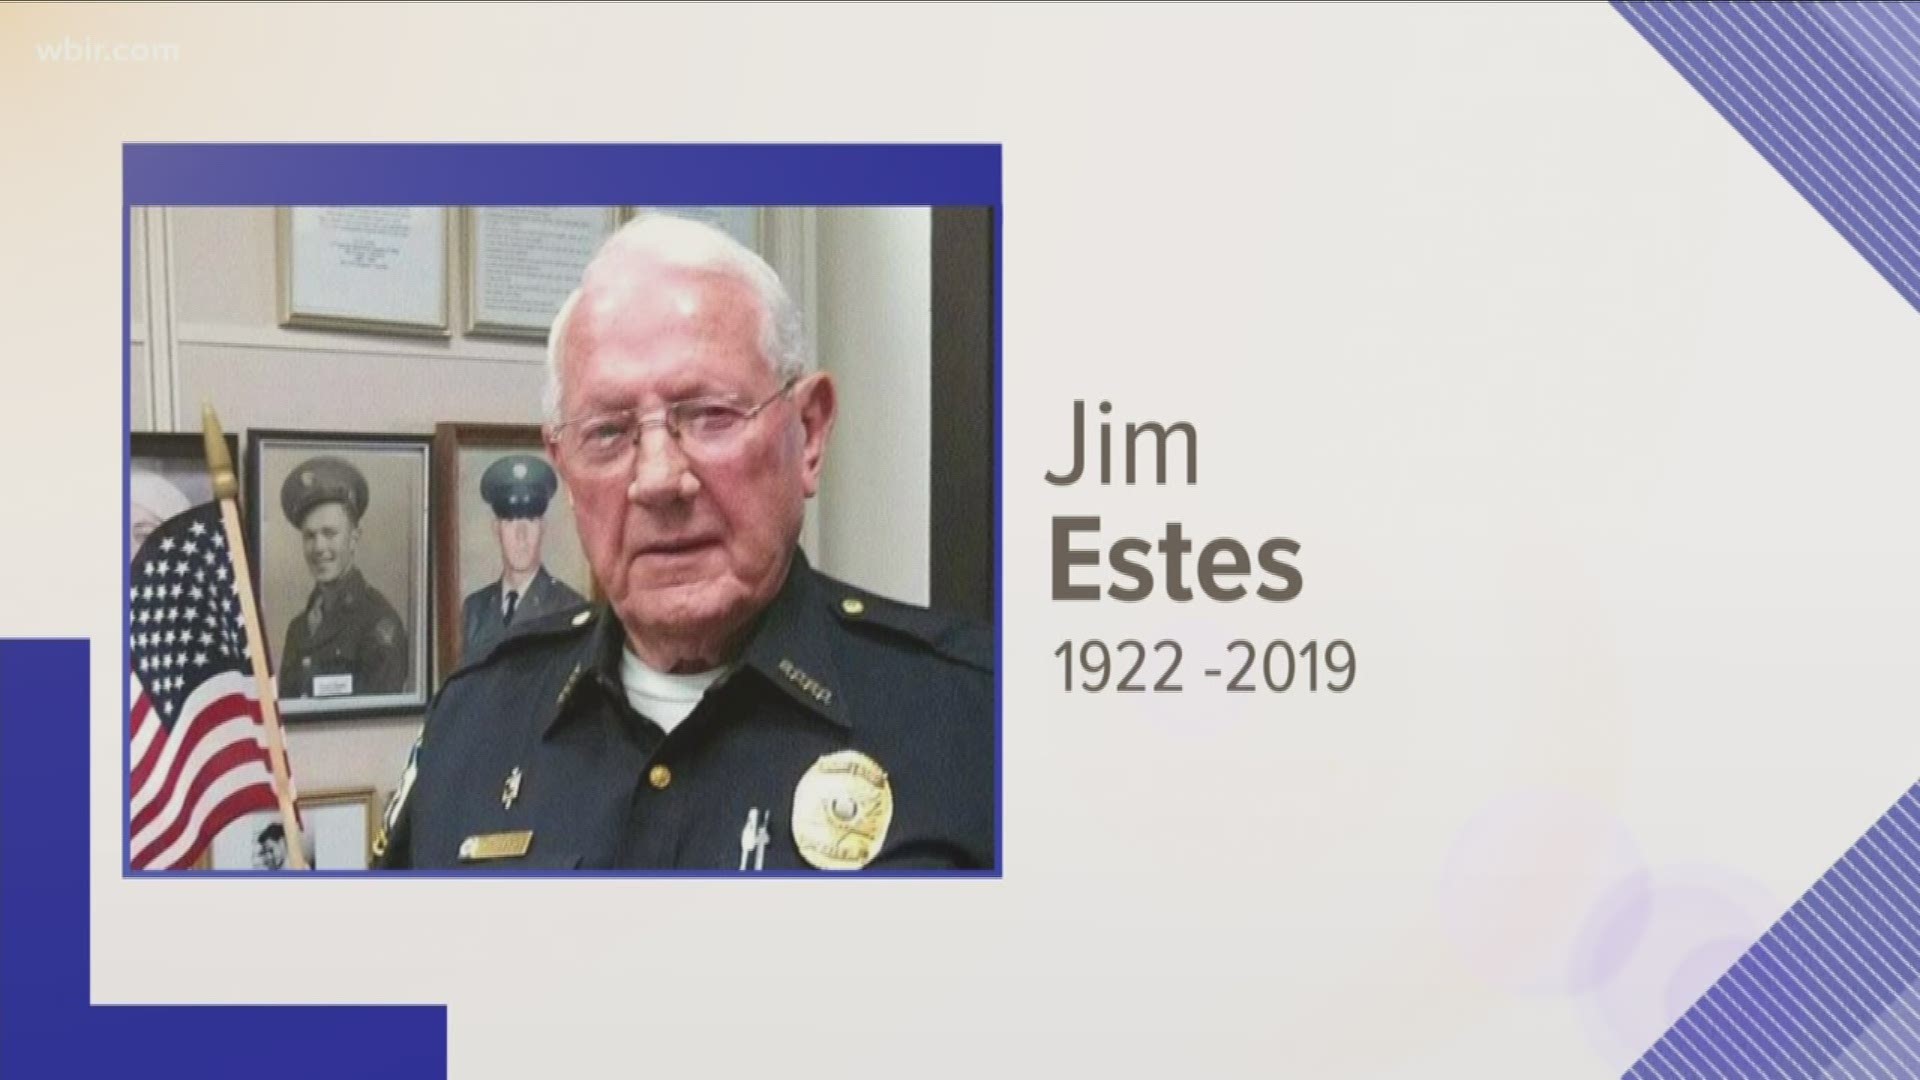 Jim Estes passed away on Friday at 97. He was a deputy with the Blount County Sheriff's Office from 1994 to 2011 and continued part-time until 2013.